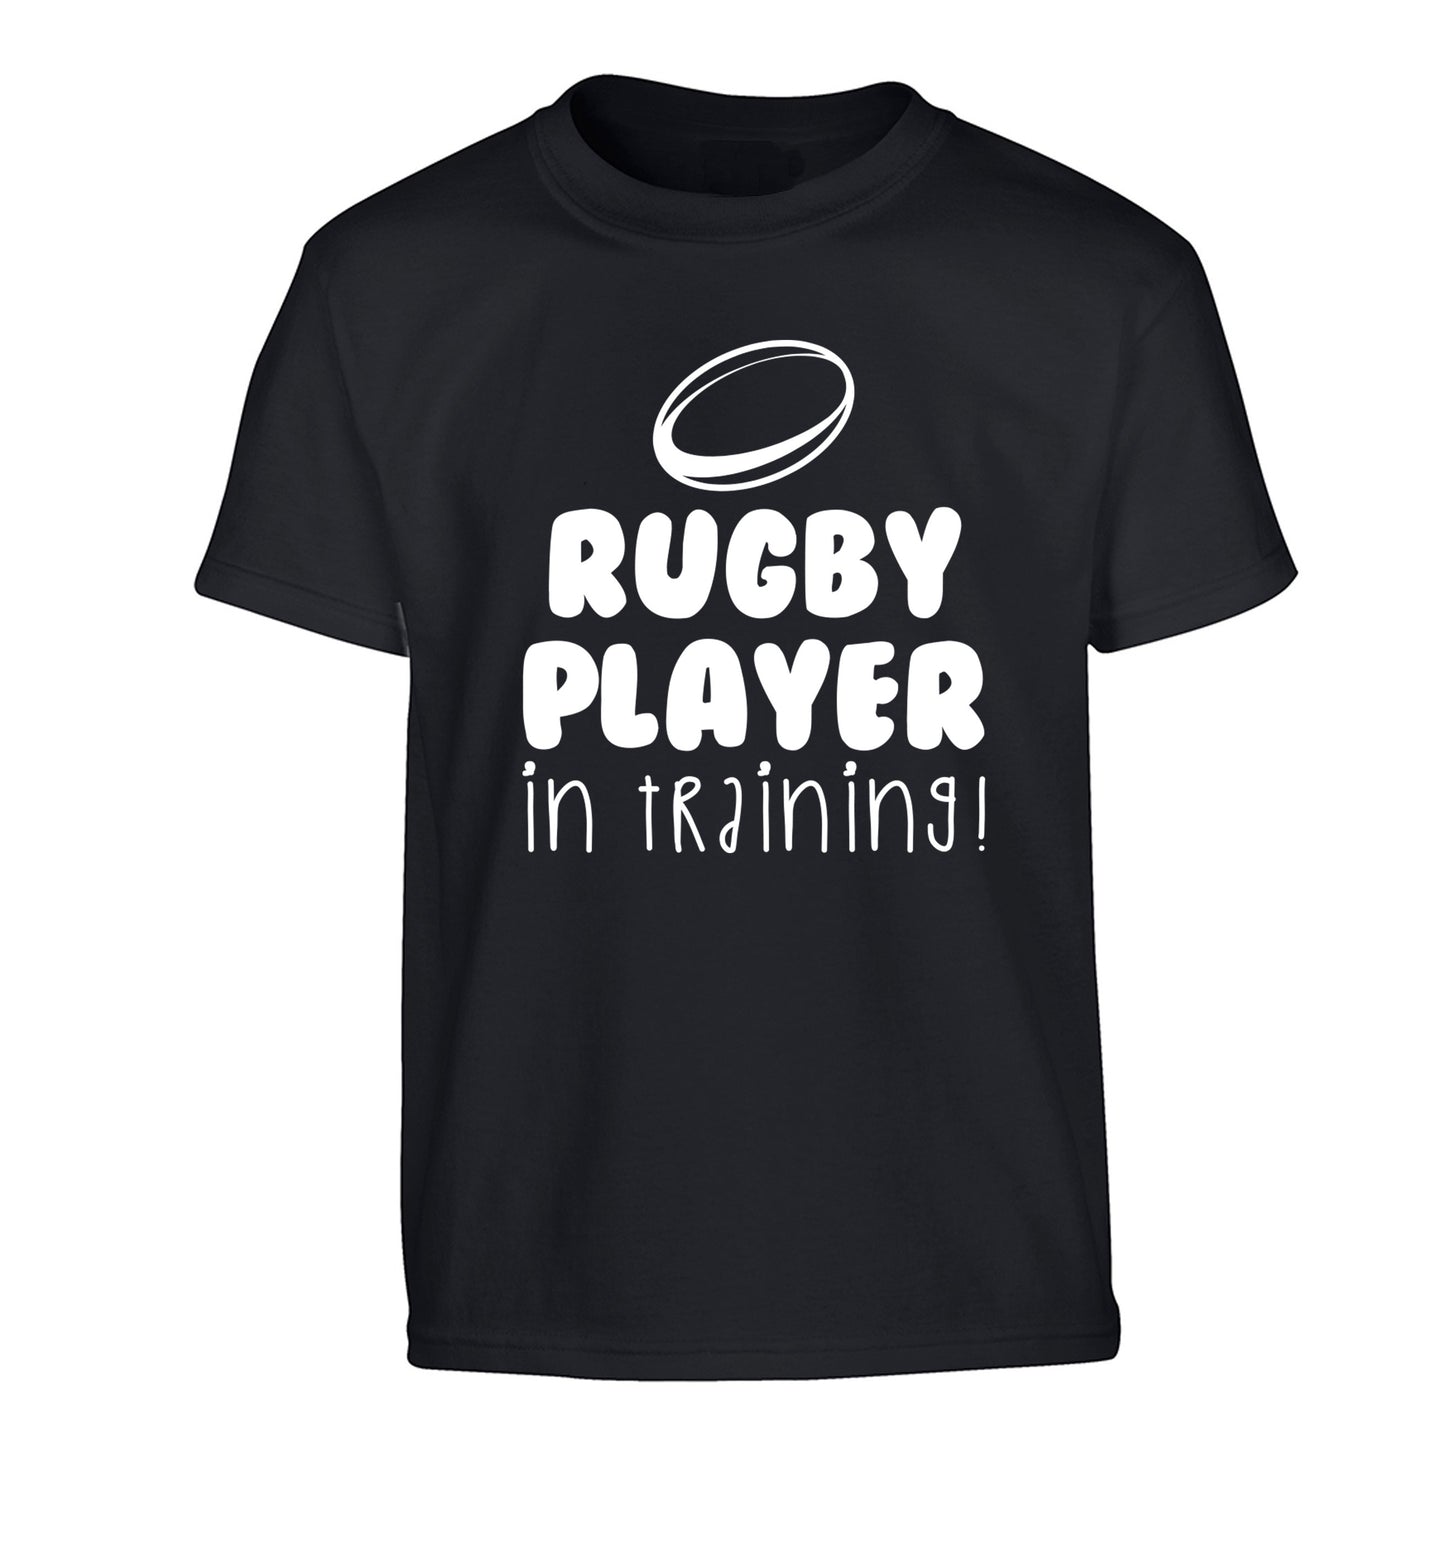 Rugby player in training Children's black Tshirt 12-14 Years